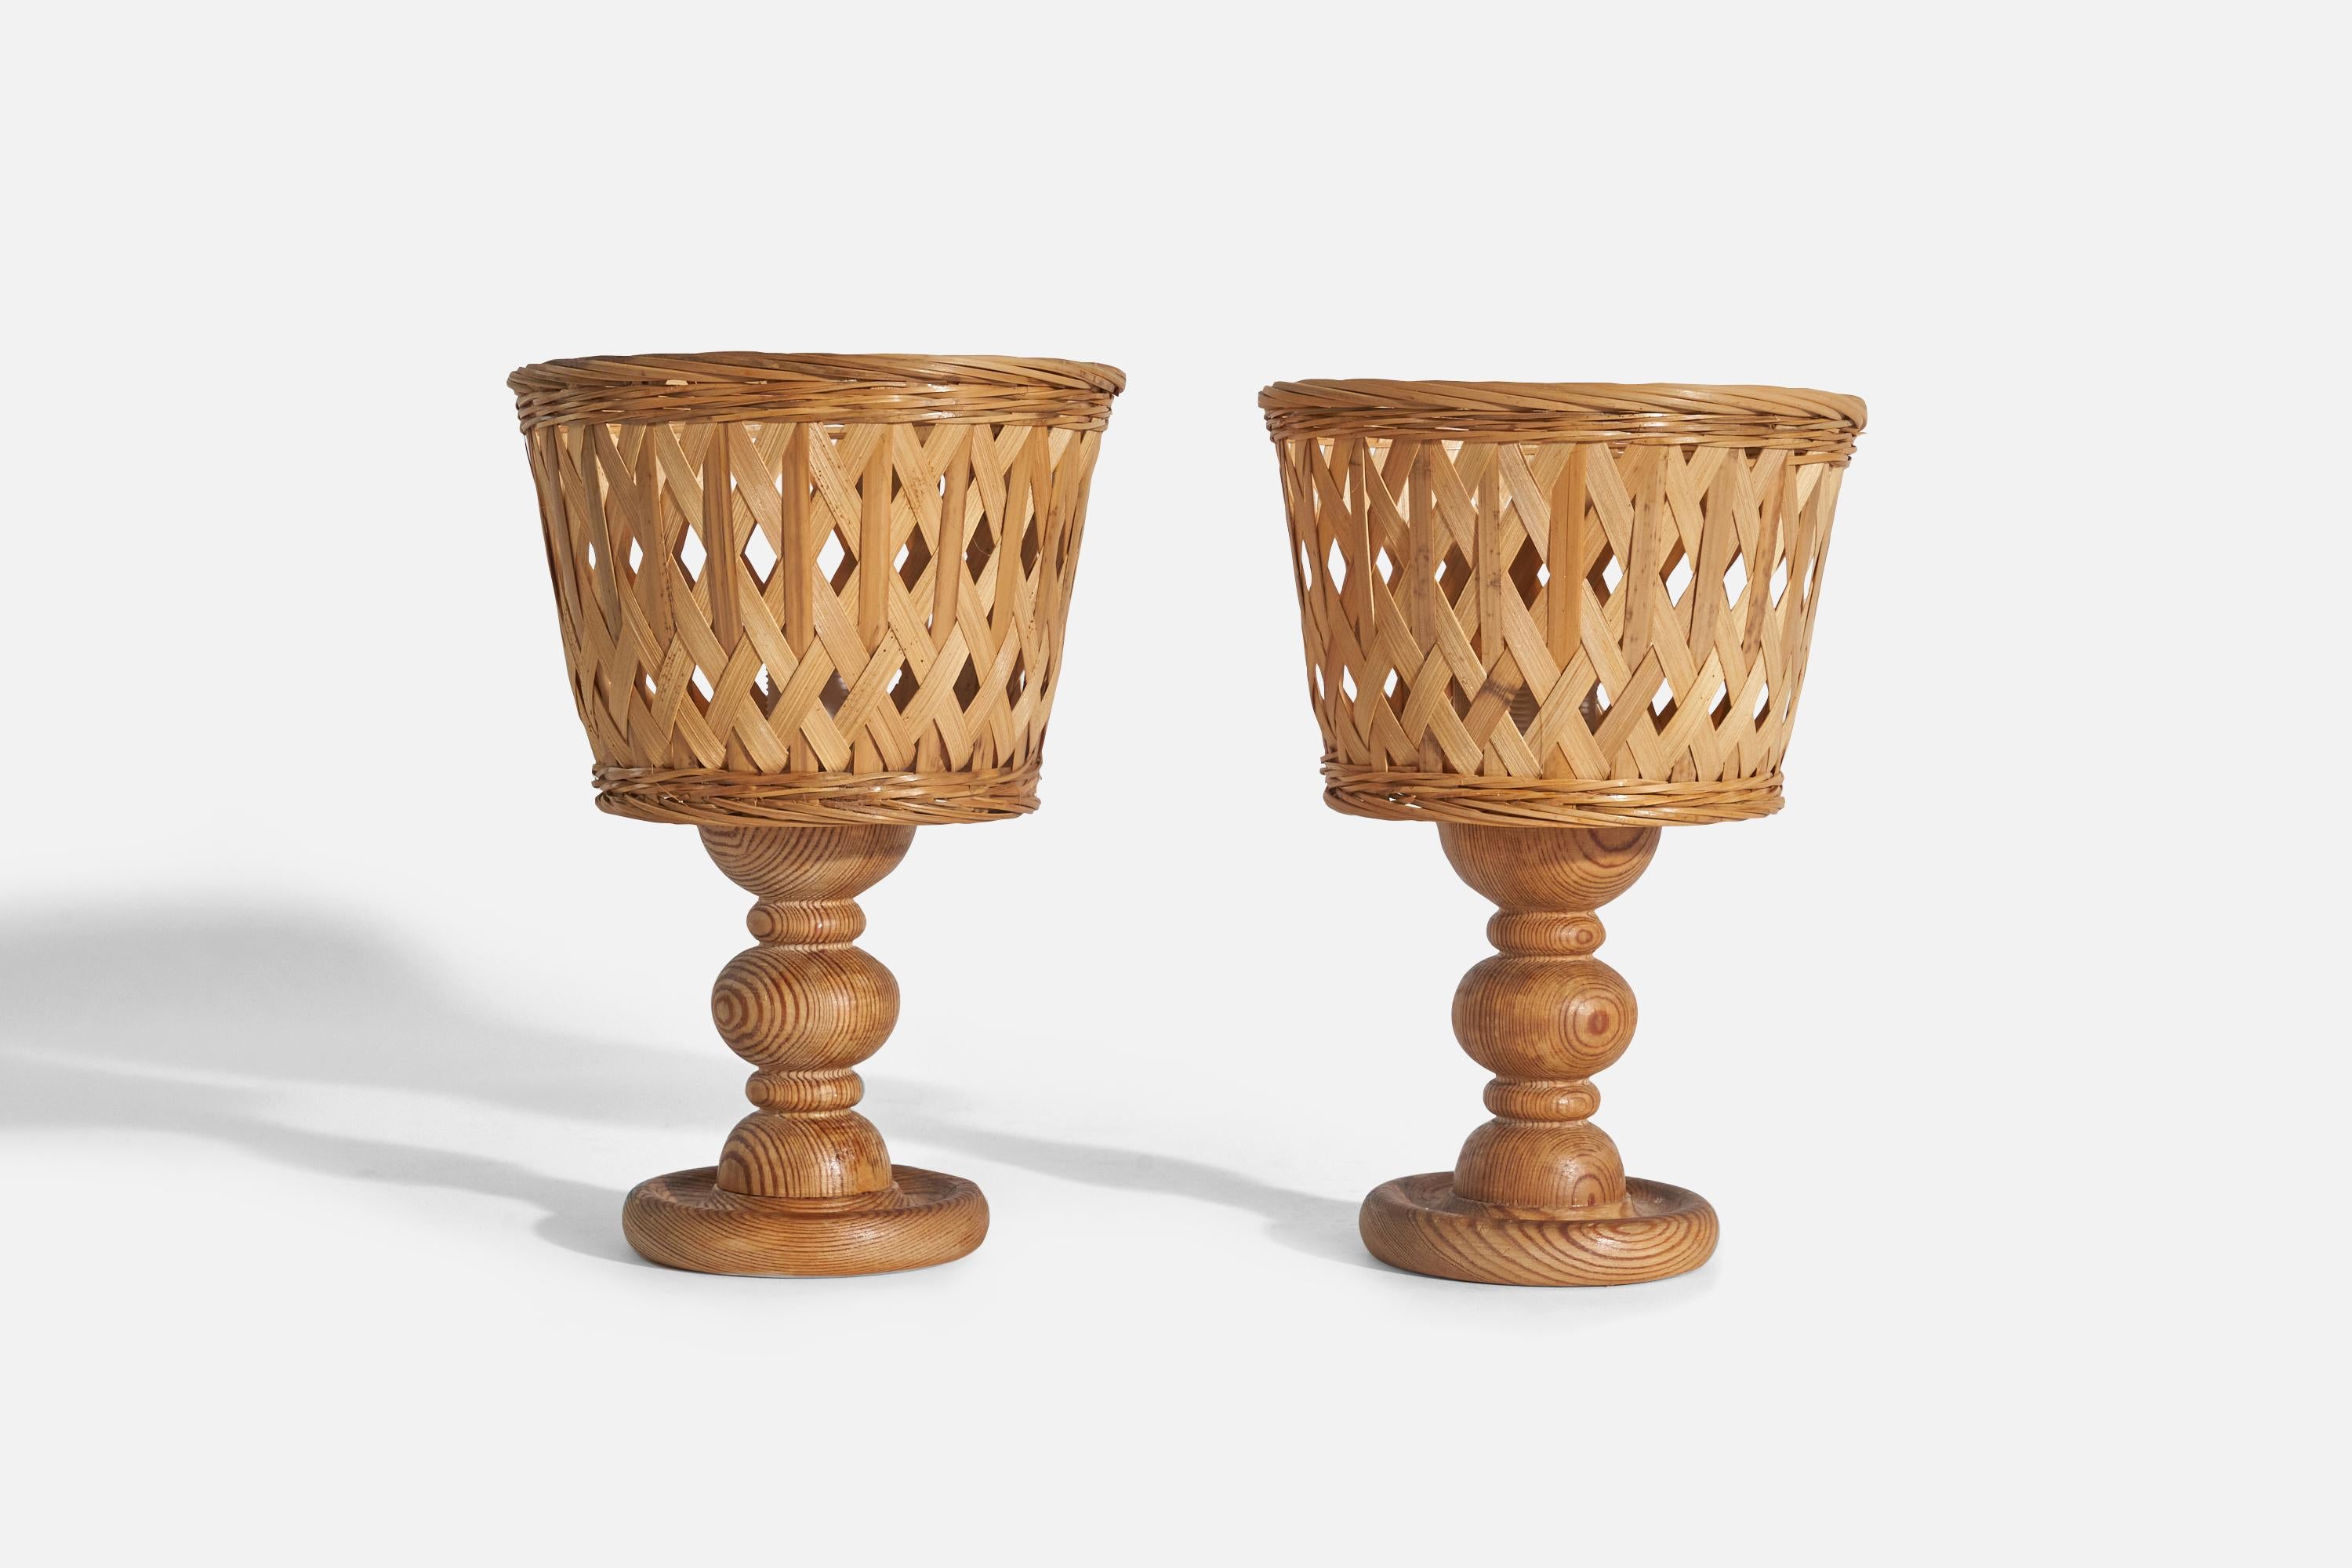 A pair of pine and rattan table lamps designed and produced in Sweden, 1970s.

Sold with Lampshade(s). 
Stated dimensions refer to the Lamp with the Shade(s). 

Socket takes E-14 bulb.
There is no maximum wattage stated on the fixture.